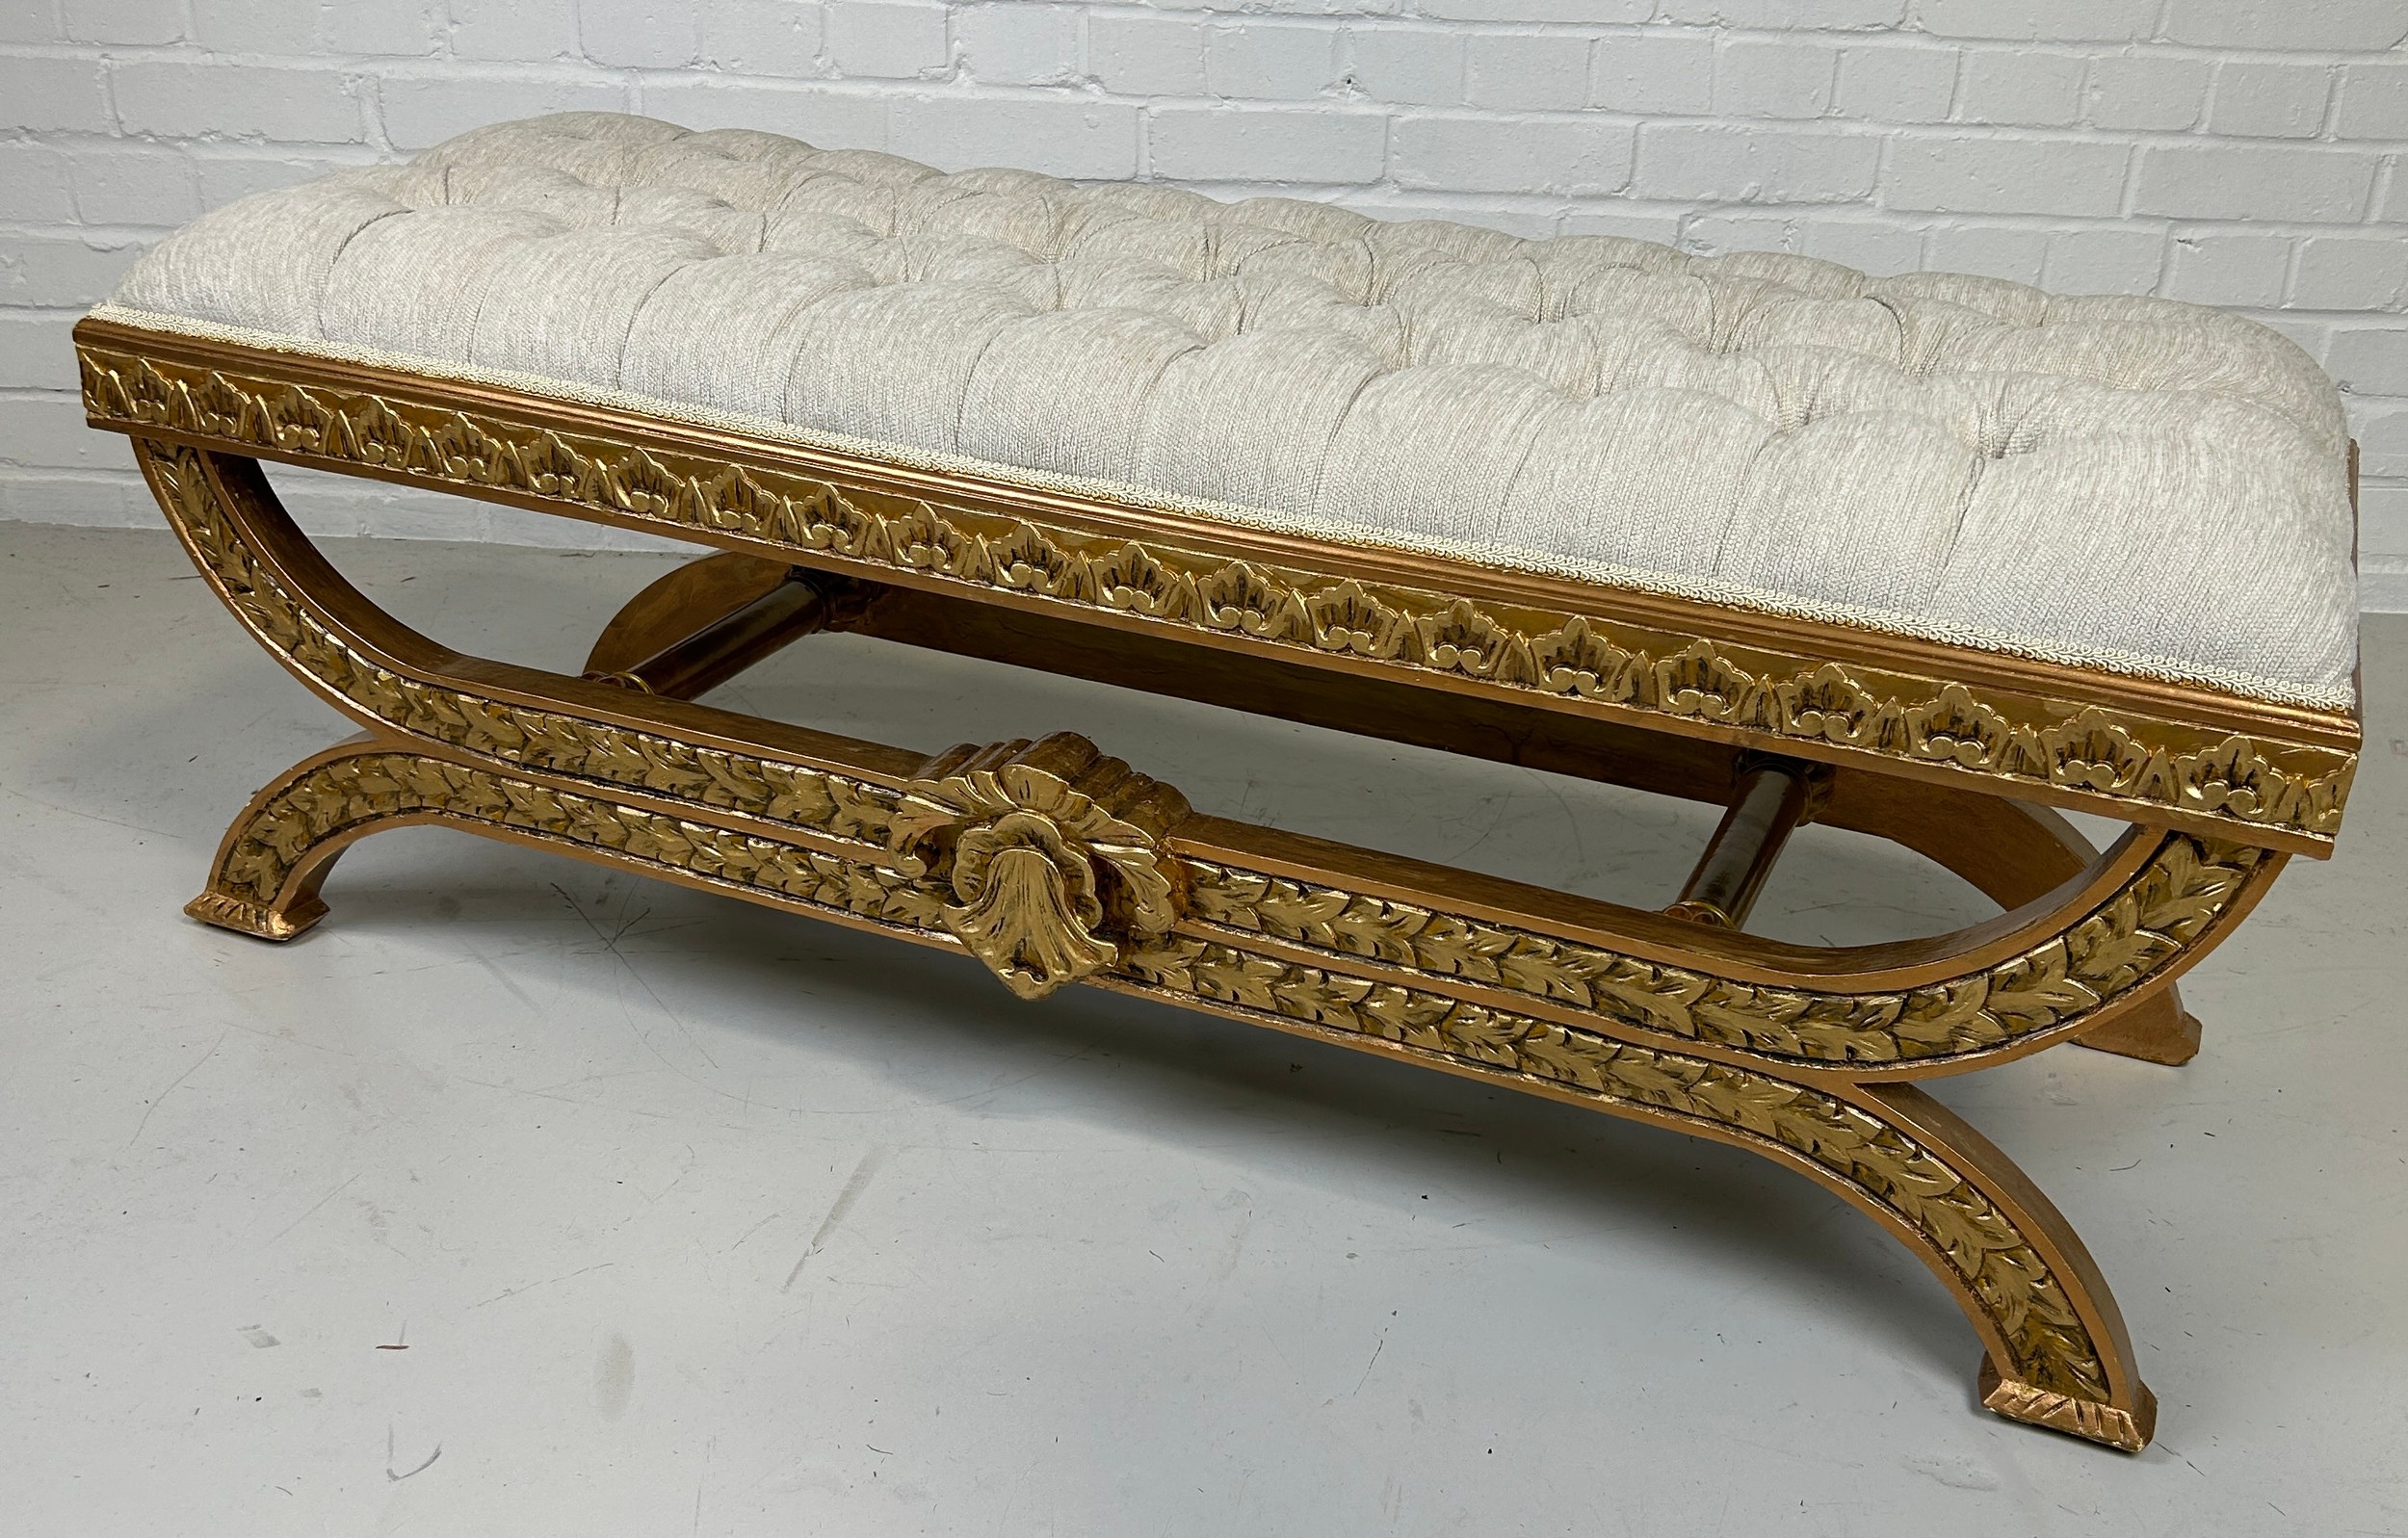 A MODERN EMPIRE STYLE FOOTSTOOL WITH CREAM UPHOLSTERED SEAT, 130cm x 50cm x 42cm - Image 3 of 4